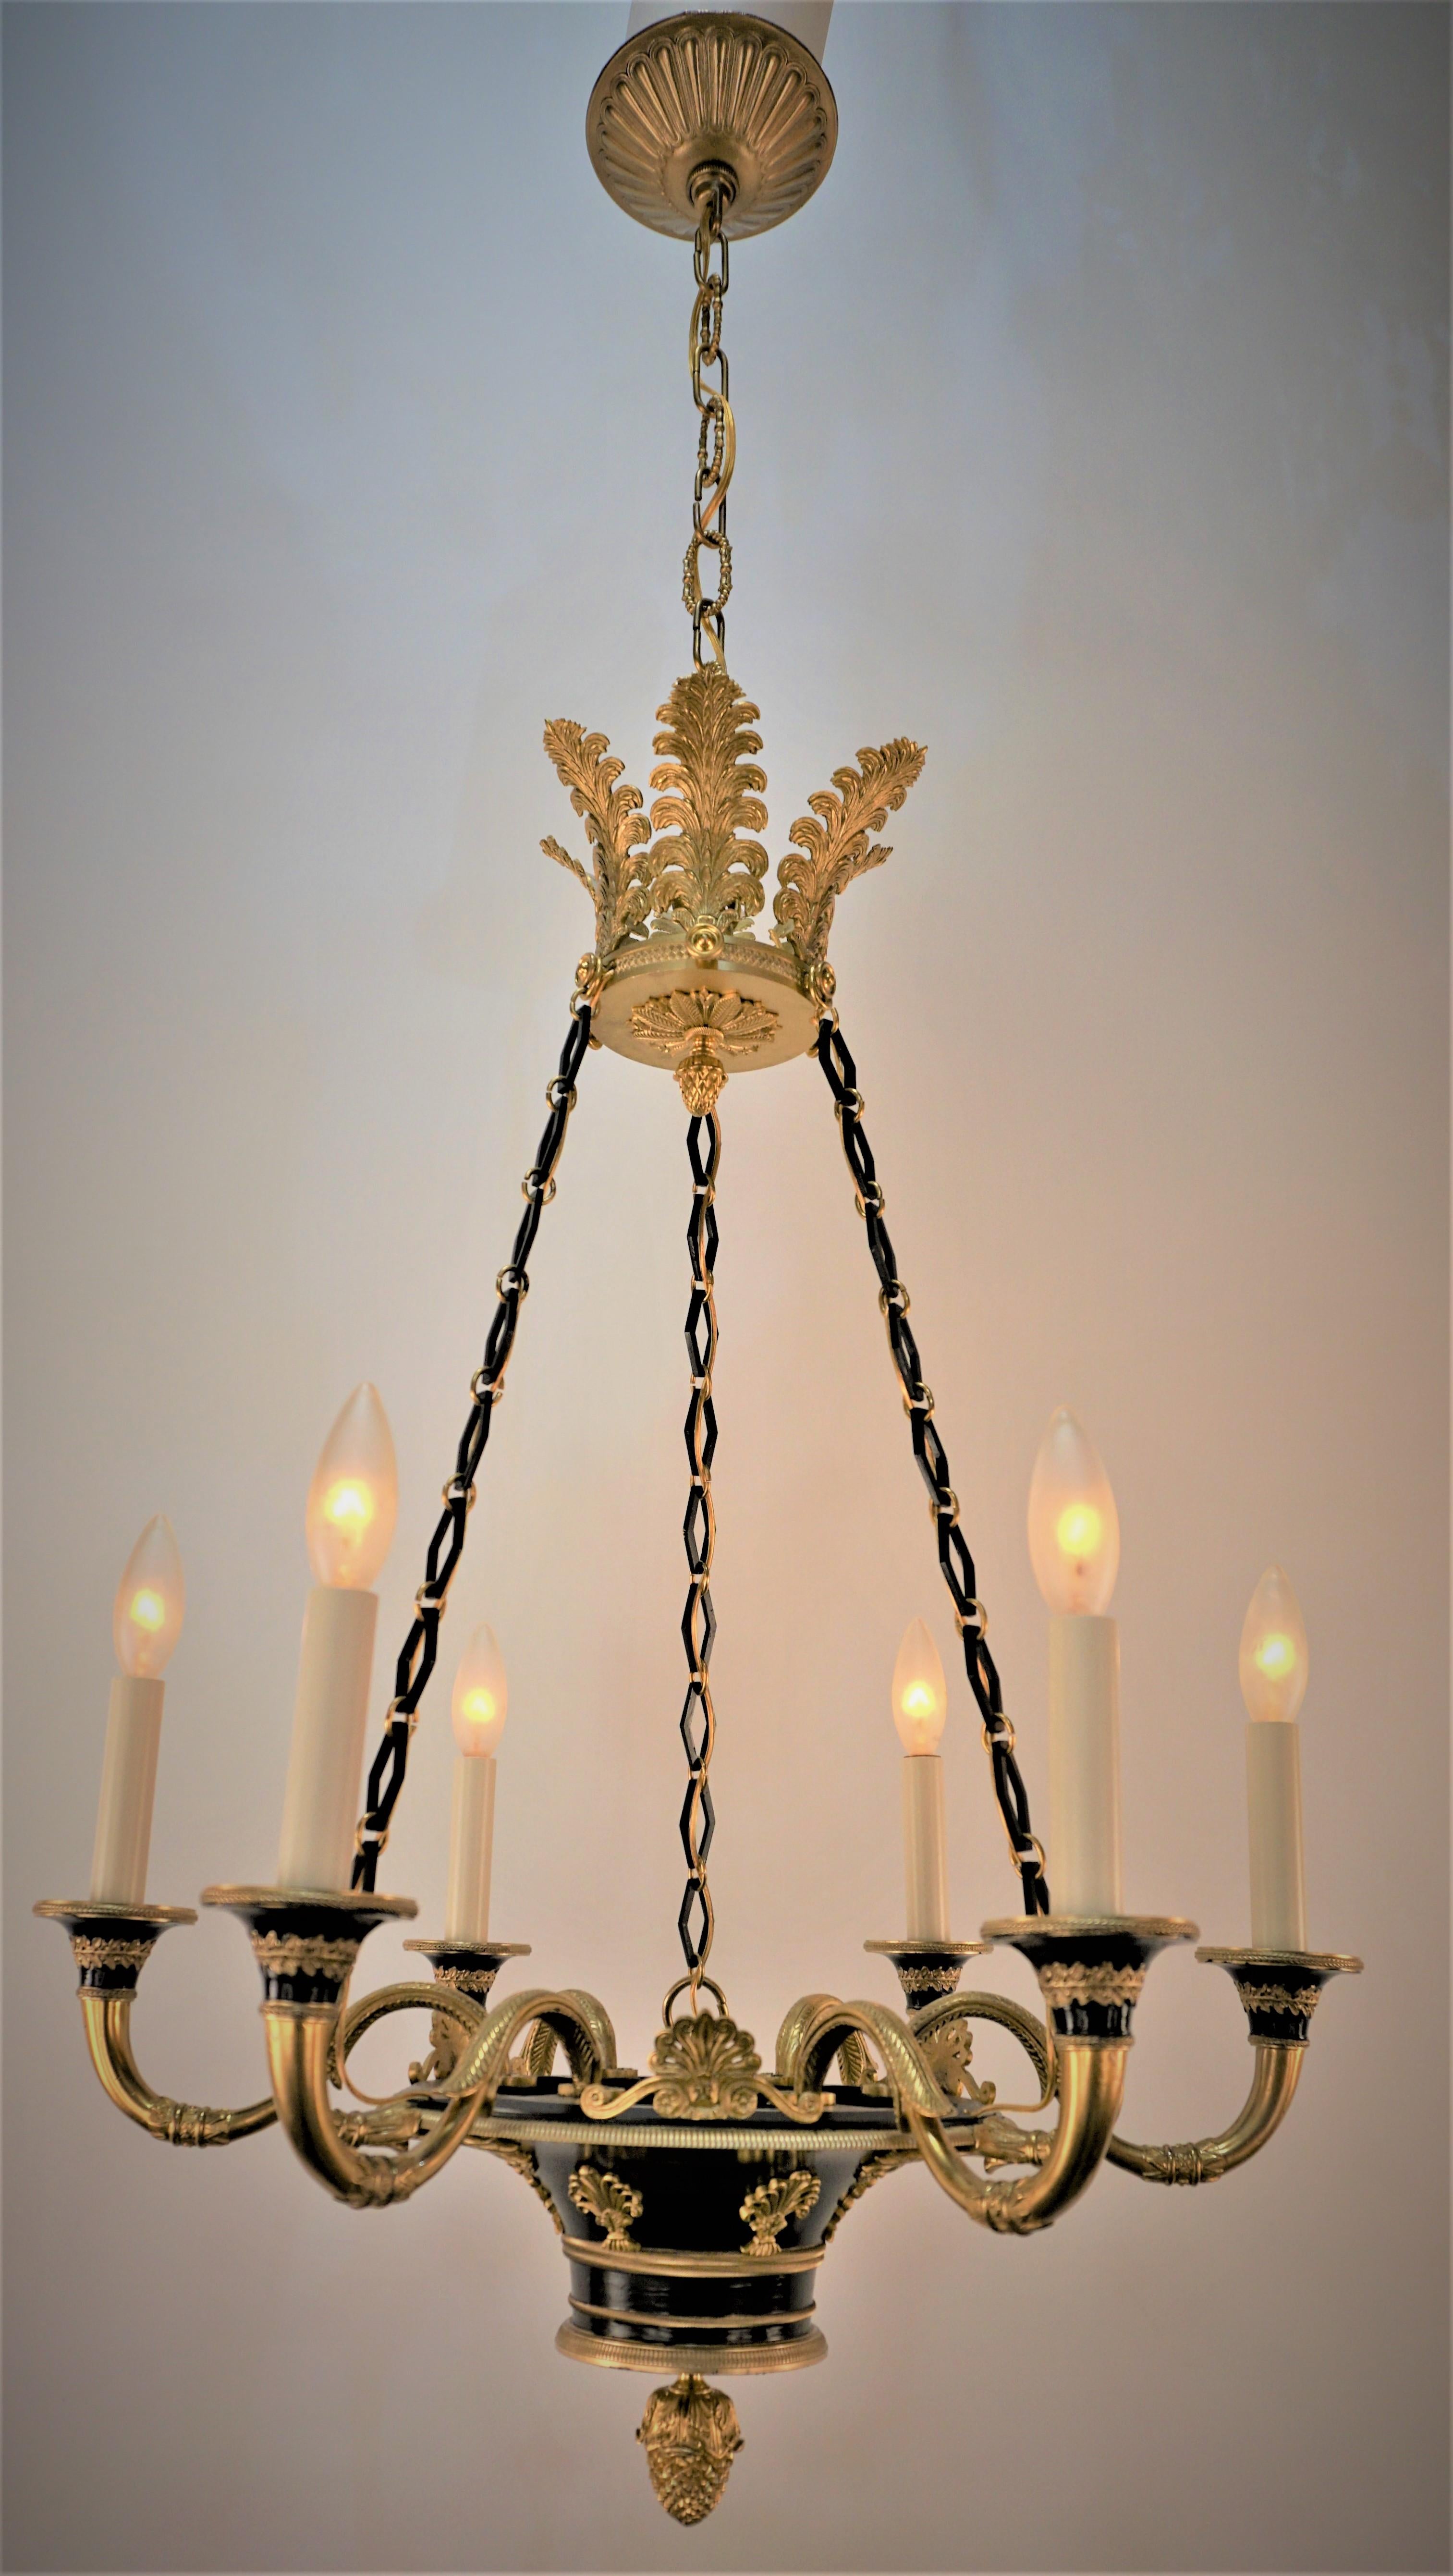 Elegant early 20th century six arm gilt bronze black lacquered empire chandelier.
Professionally rewired and ready for installation.
Height can be adjusted by removing some of the chain.